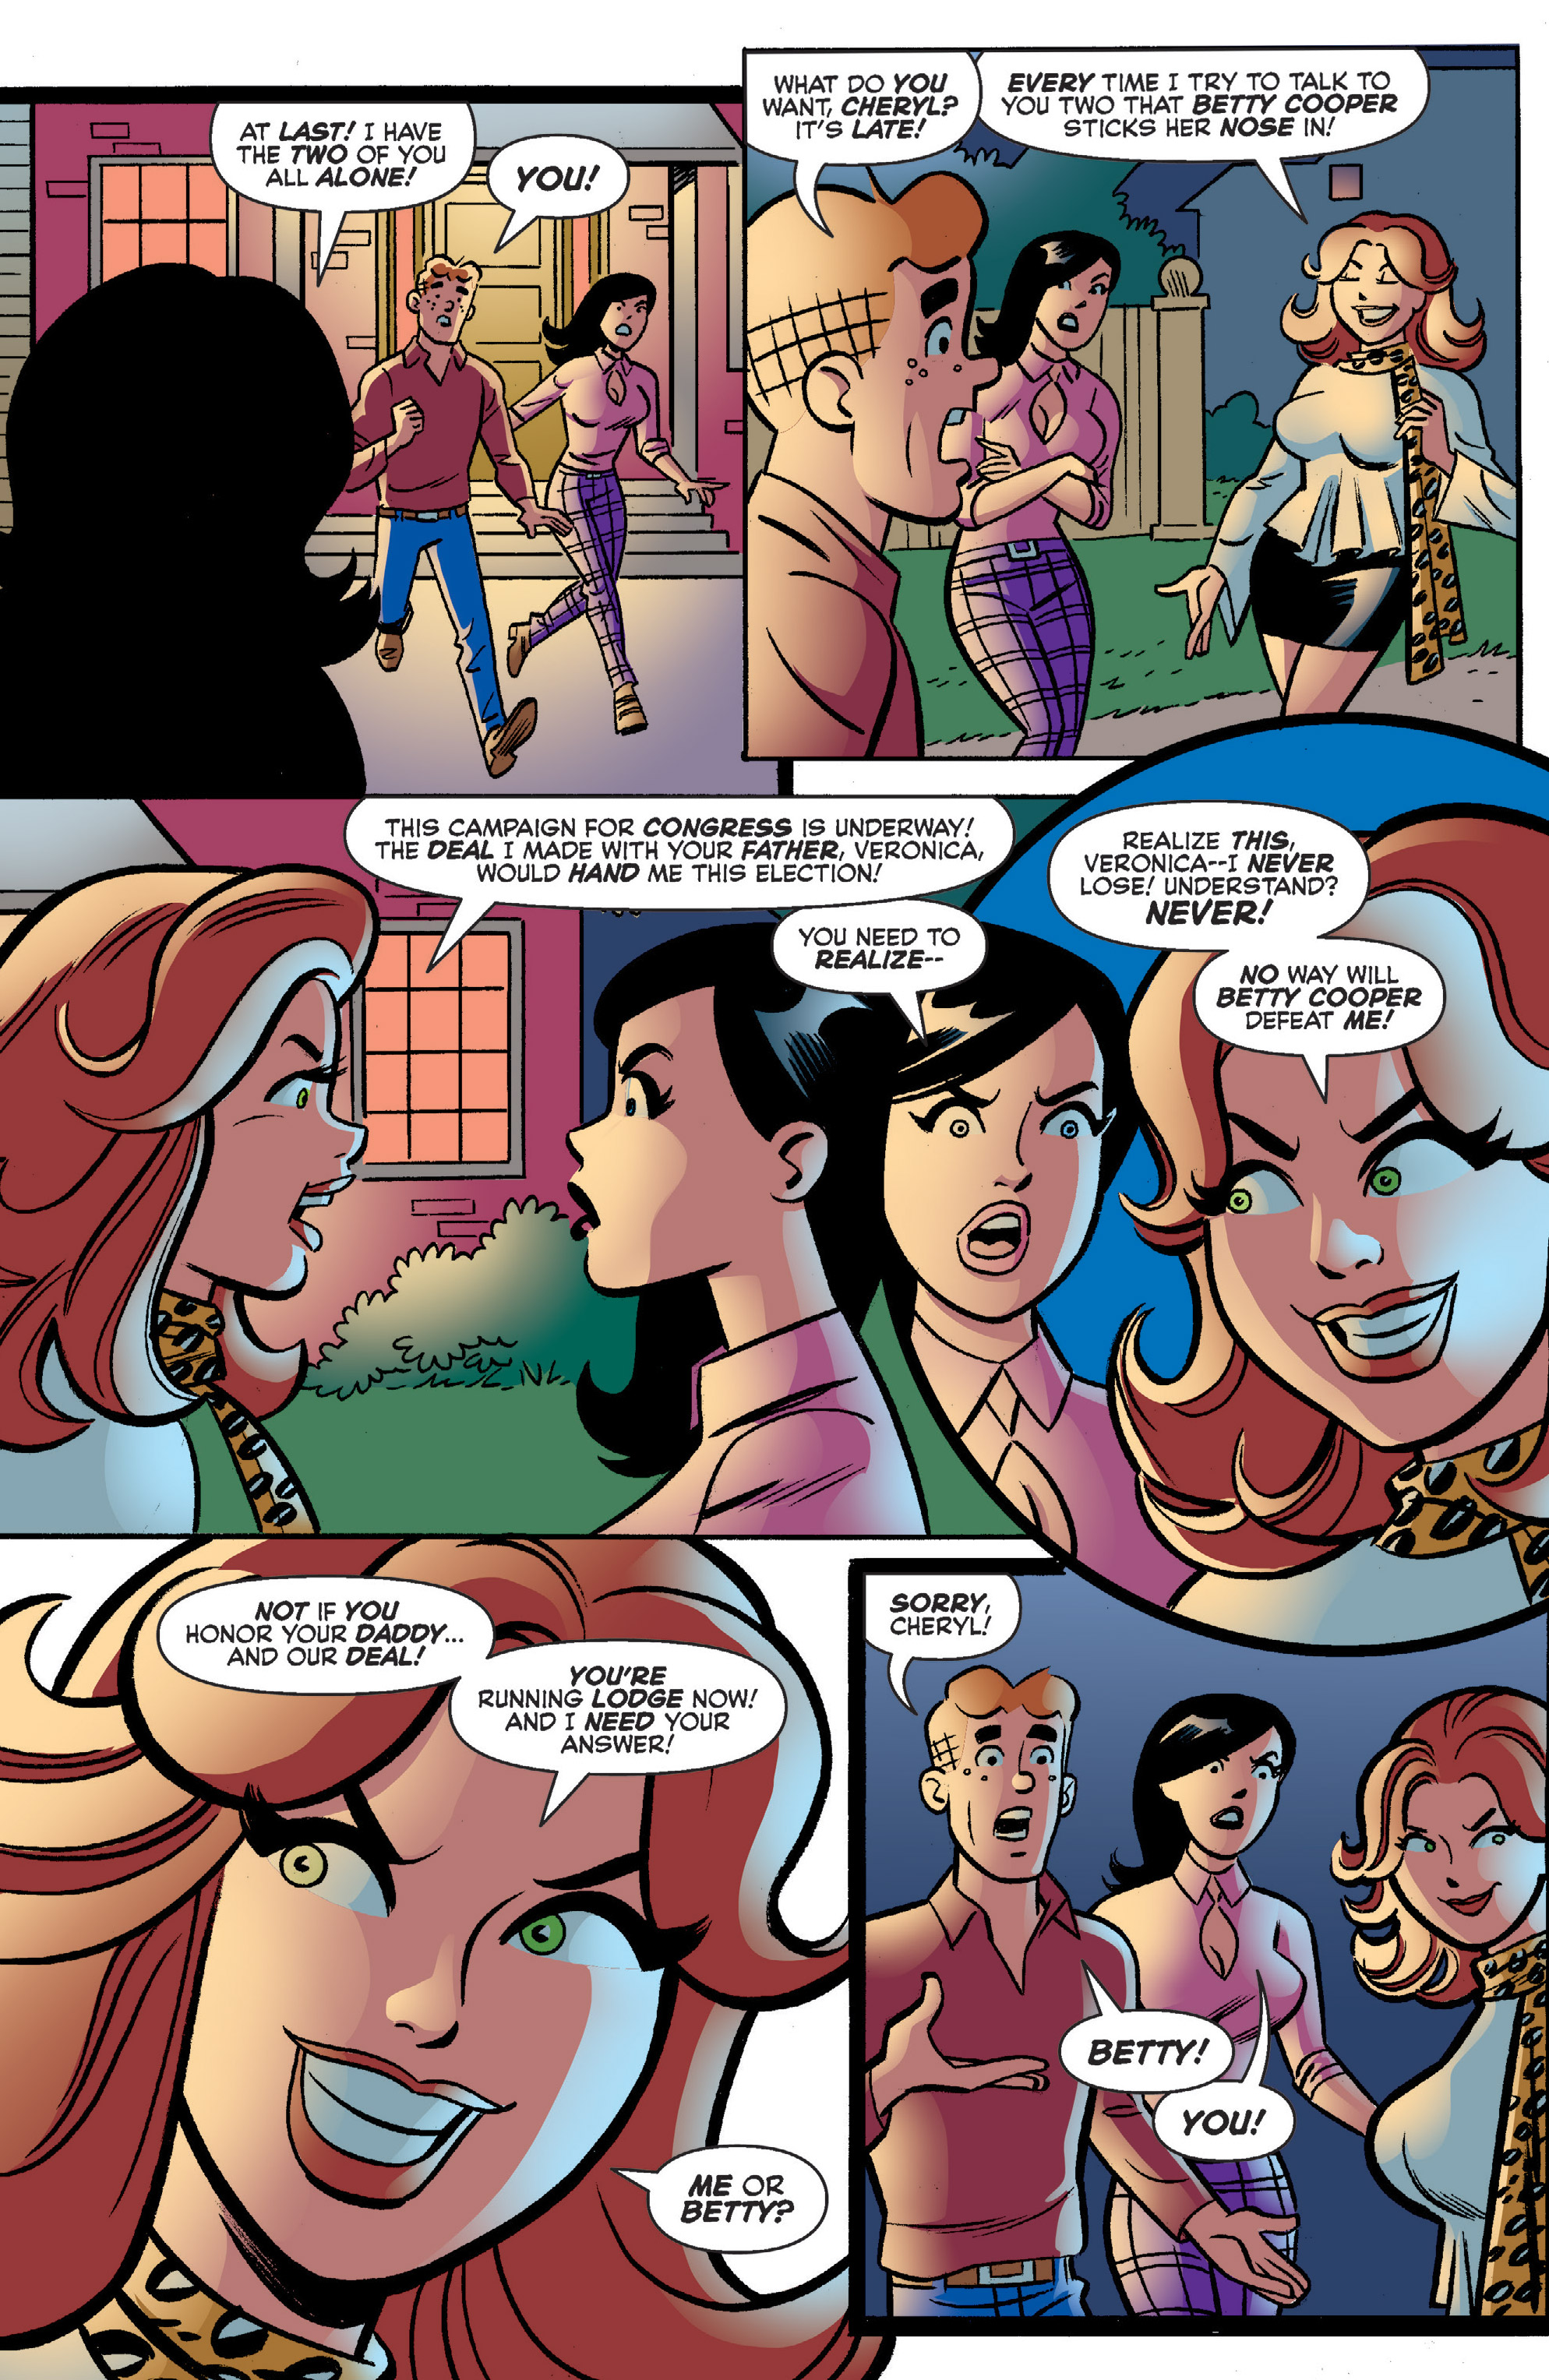 Archie: The Married Life - 10th Anniversary (2019-): Chapter 4 - Page 5